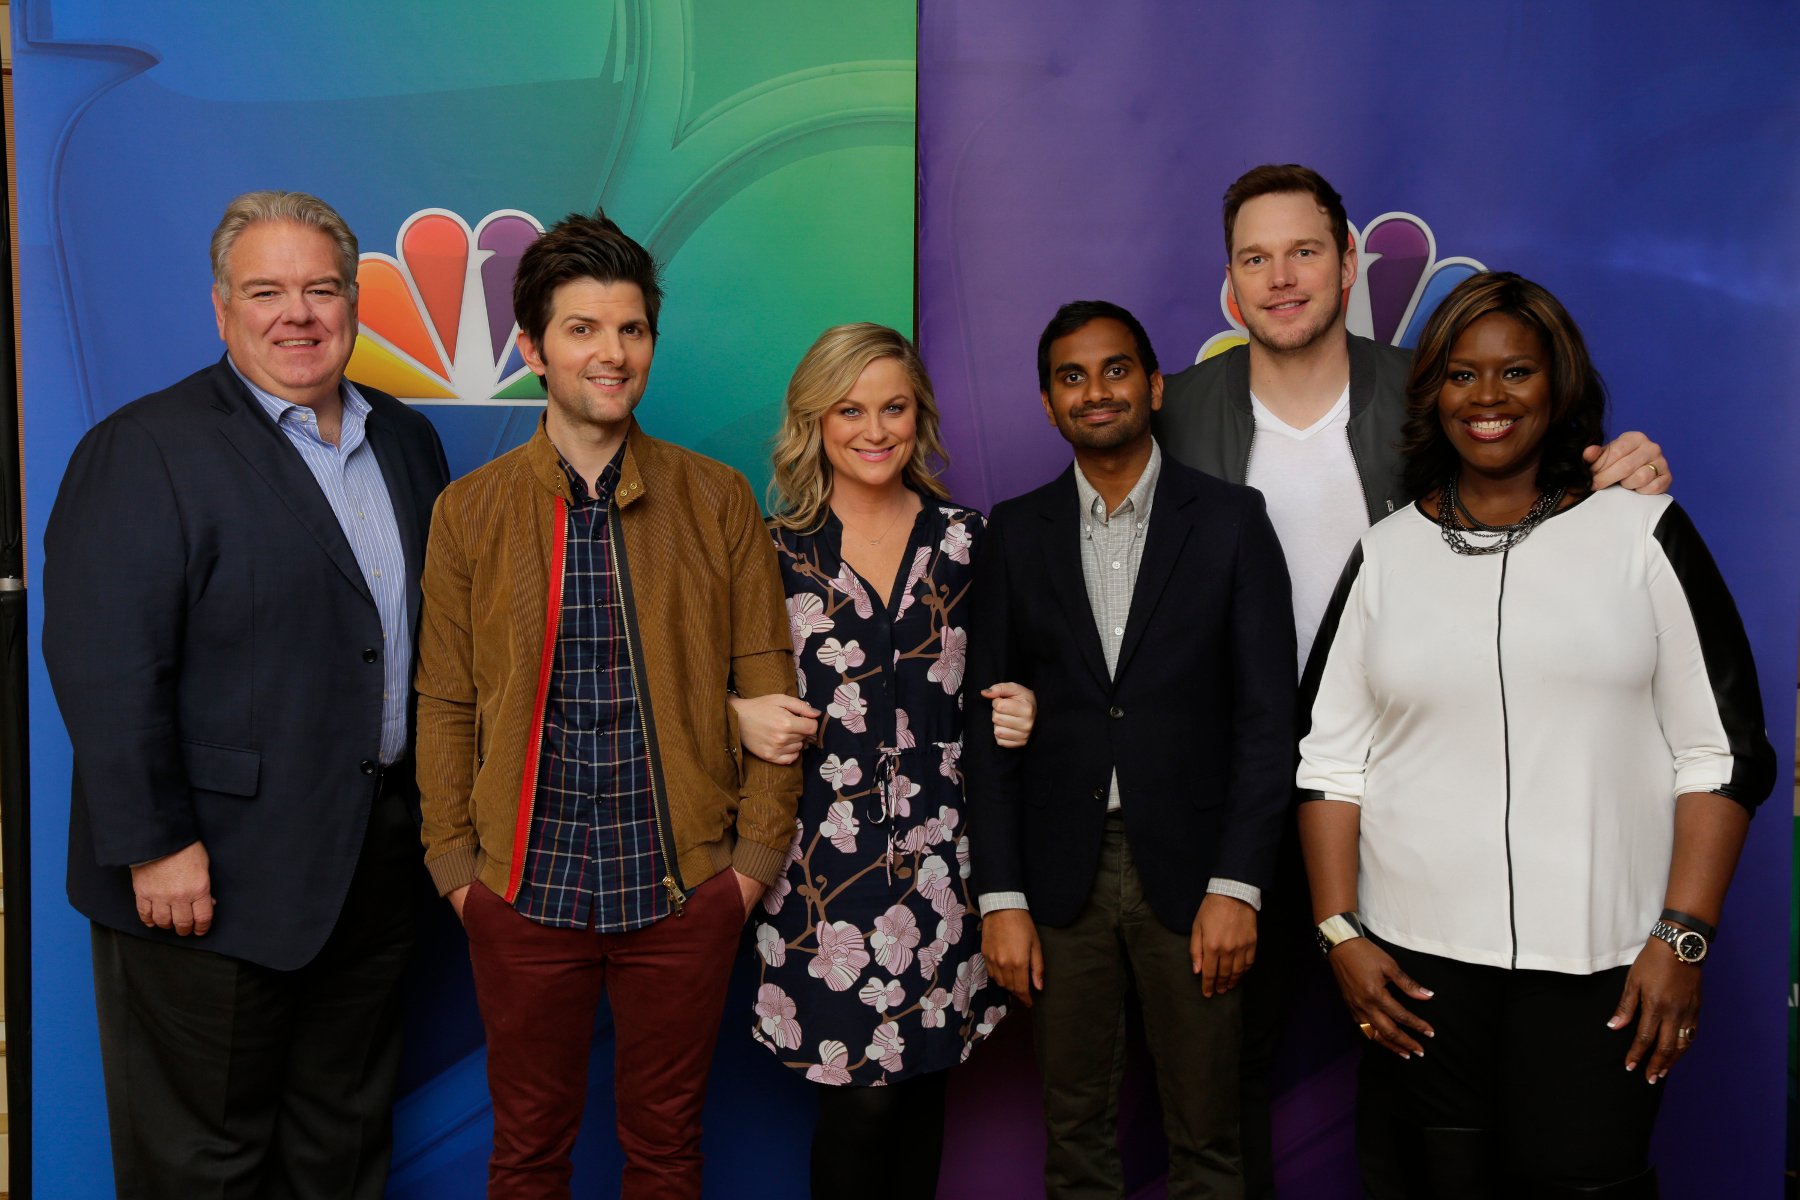 'Parks and Recreation' cast members Jim O'Heir, Adam Scott, Amy Poehler, Aziz Ansari, Chris Pratt, and Retta for our article about how the show almost had a different name.